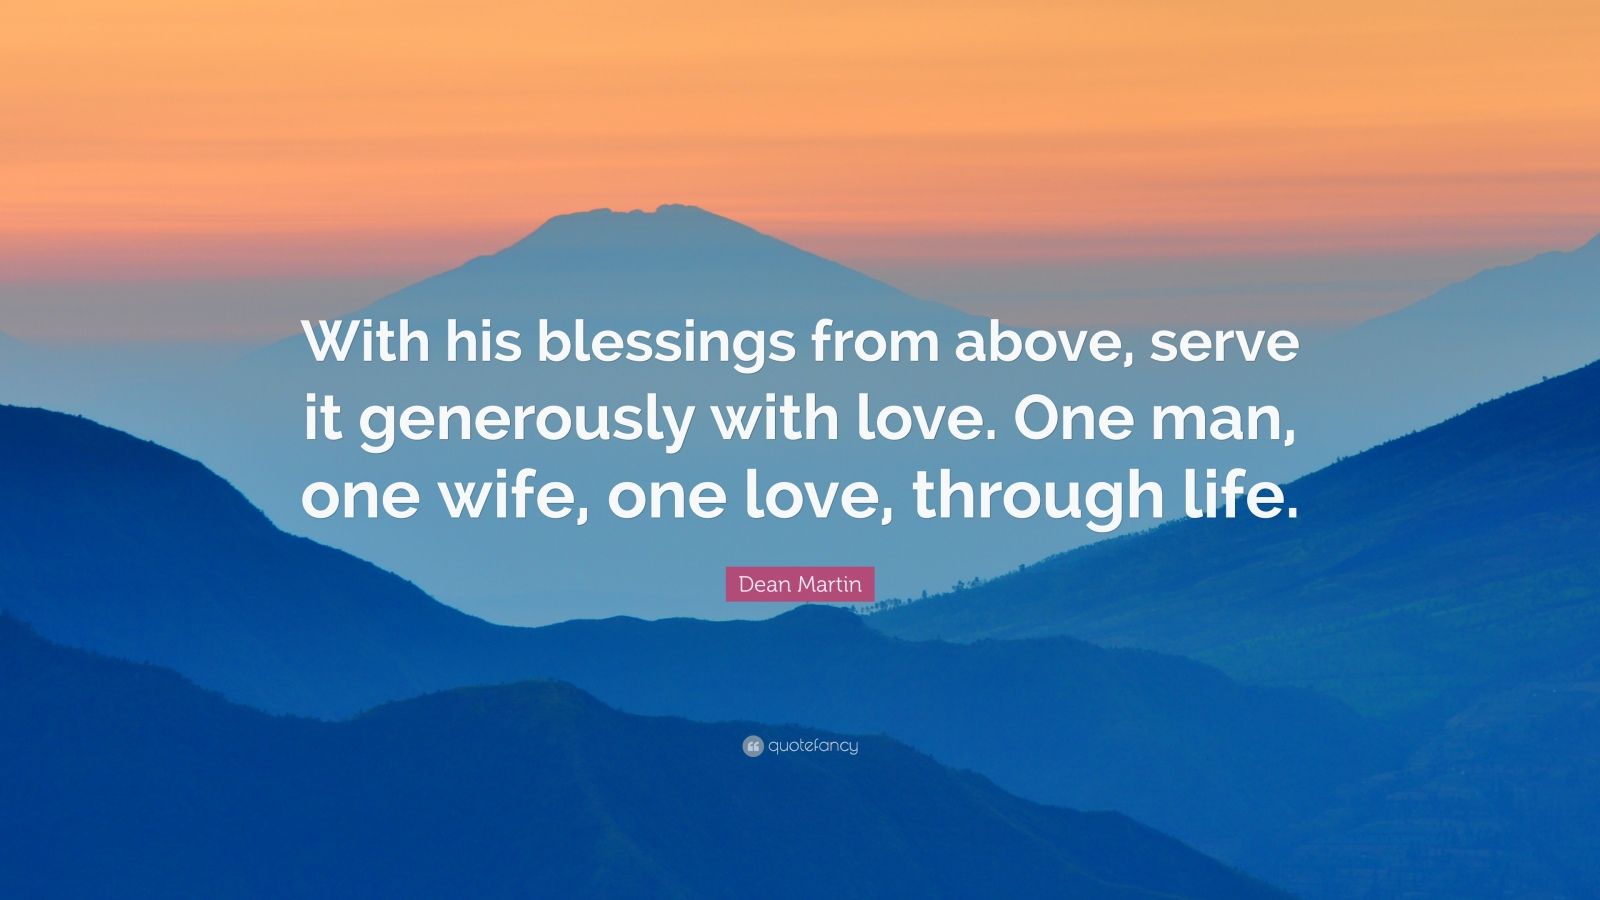 Dean Martin Quote: “With his blessings from above, serve it generously with love. One man, one wife, one love, through life.”